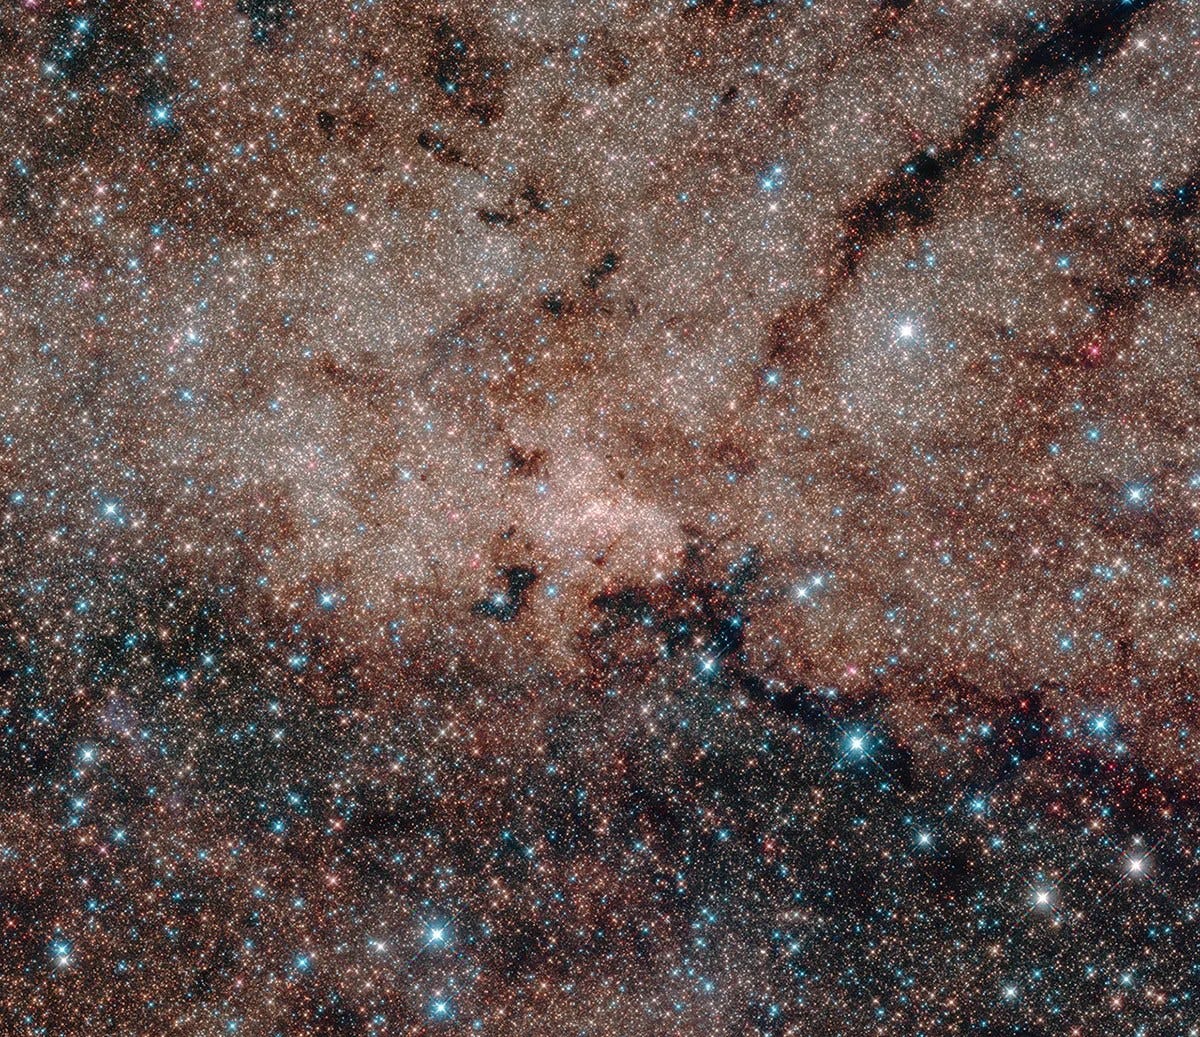 Hubble's infrared vision pierced the dusty heart of our Milky Way galaxy to reveal more than half a million stars at its core. At the very hub of our galaxy, this star cluster surrounds the Milky Way's central supermassive black hole, which is about 4 million times the mass of our sun. | NASA, ESA, and Hubble Heritage Team (STScI/AURA, Acknowledgment: T. Do, A.Ghez (UCLA), V. Bajaj (STScI)